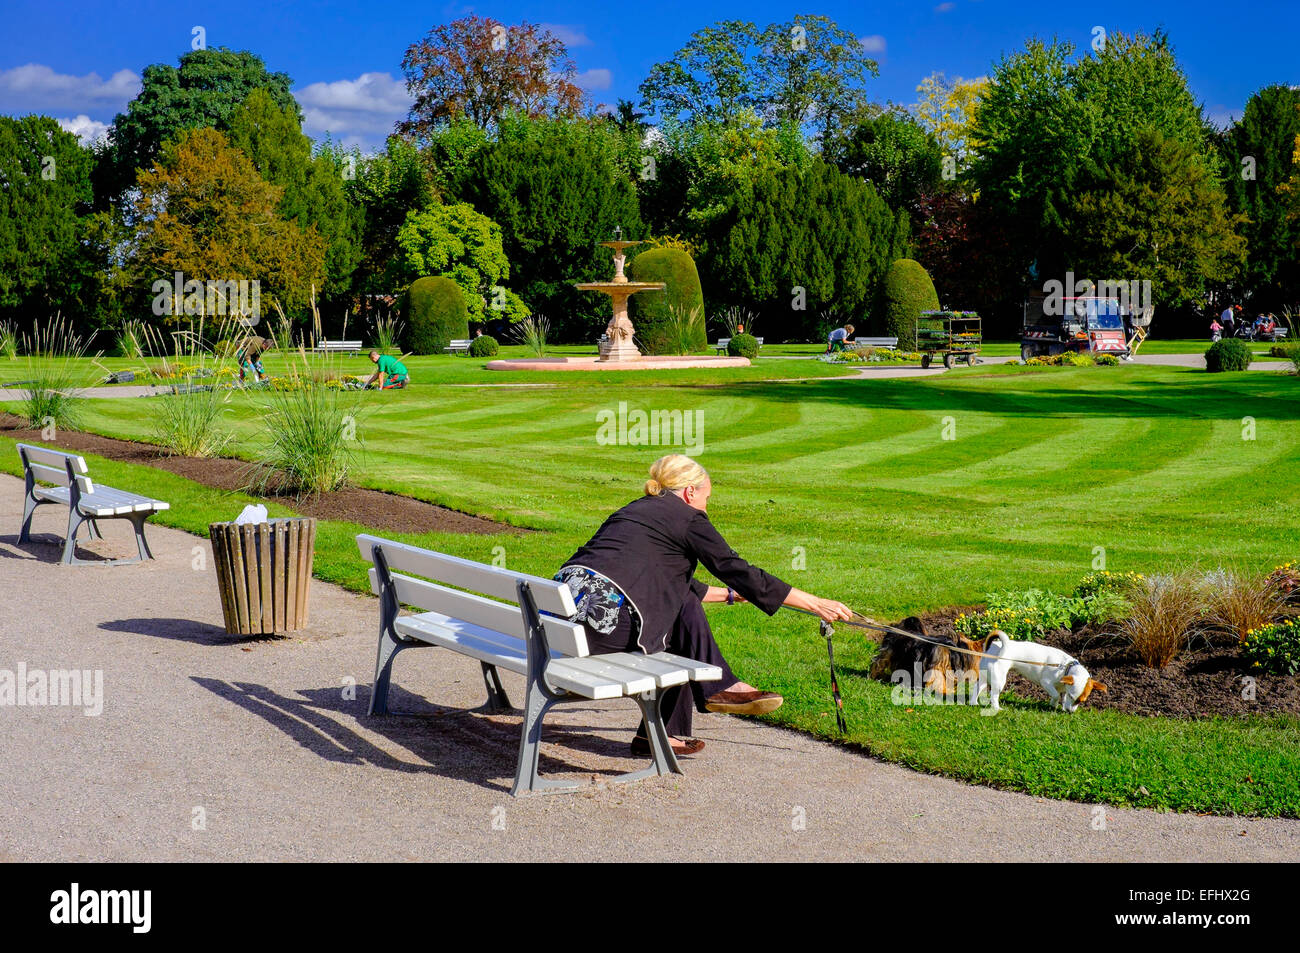 Woman seated on bench and 2 dogs Parc de l'Orangerie park Strasbourg Alsace France Europe Stock Photo